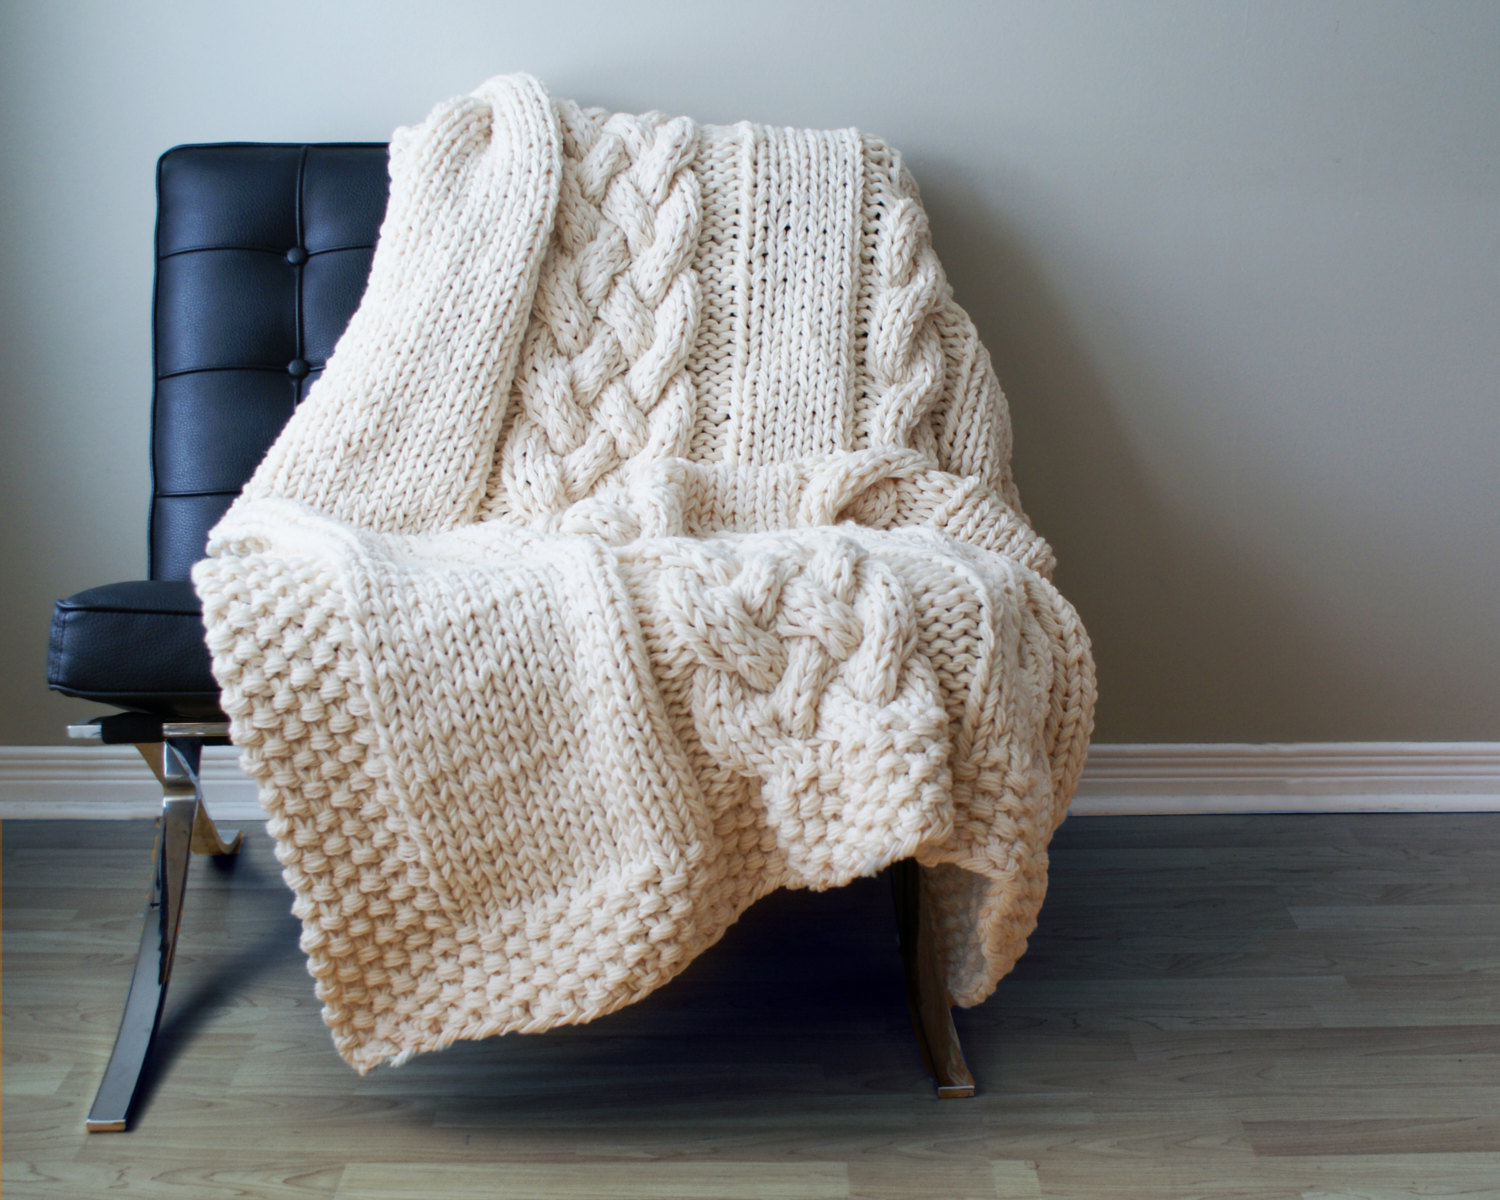 Using knits in your home décor for warmer winter